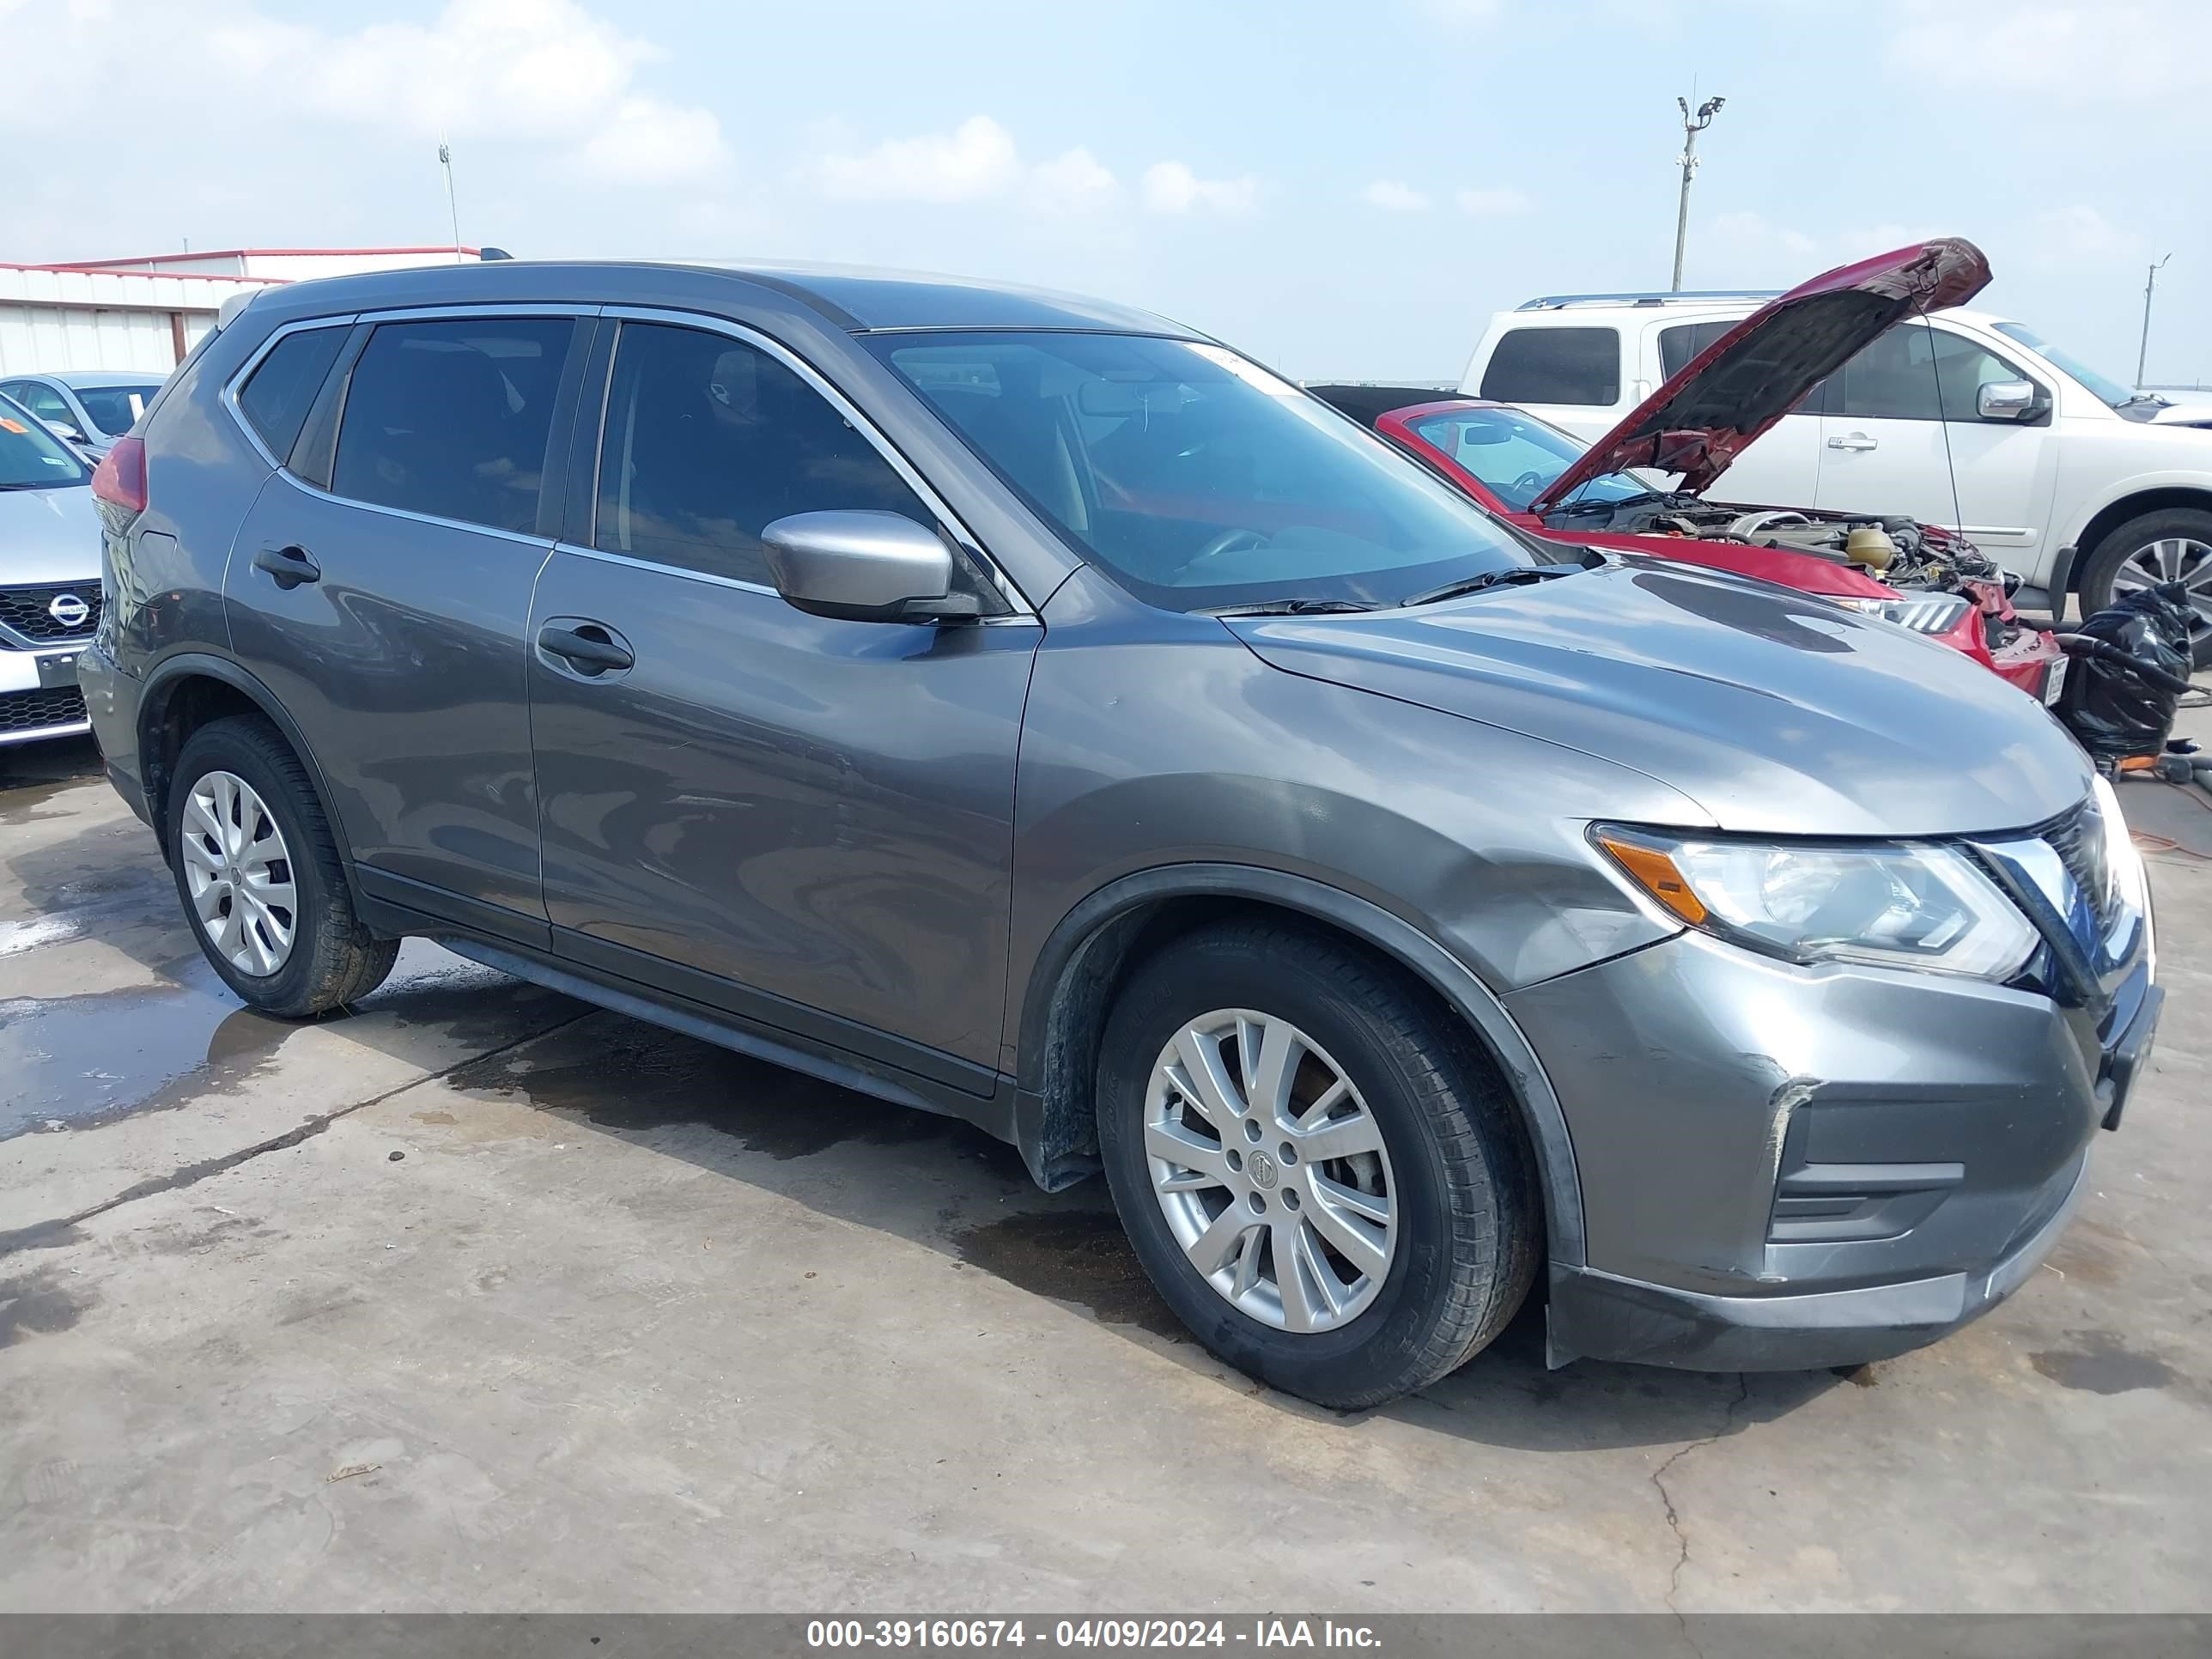 vin: KNMAT2MT4JP610990 KNMAT2MT4JP610990 2018 nissan rogue 2500 for Sale in 78616, 2191 Highway 21 West, Dale, Texas, USA